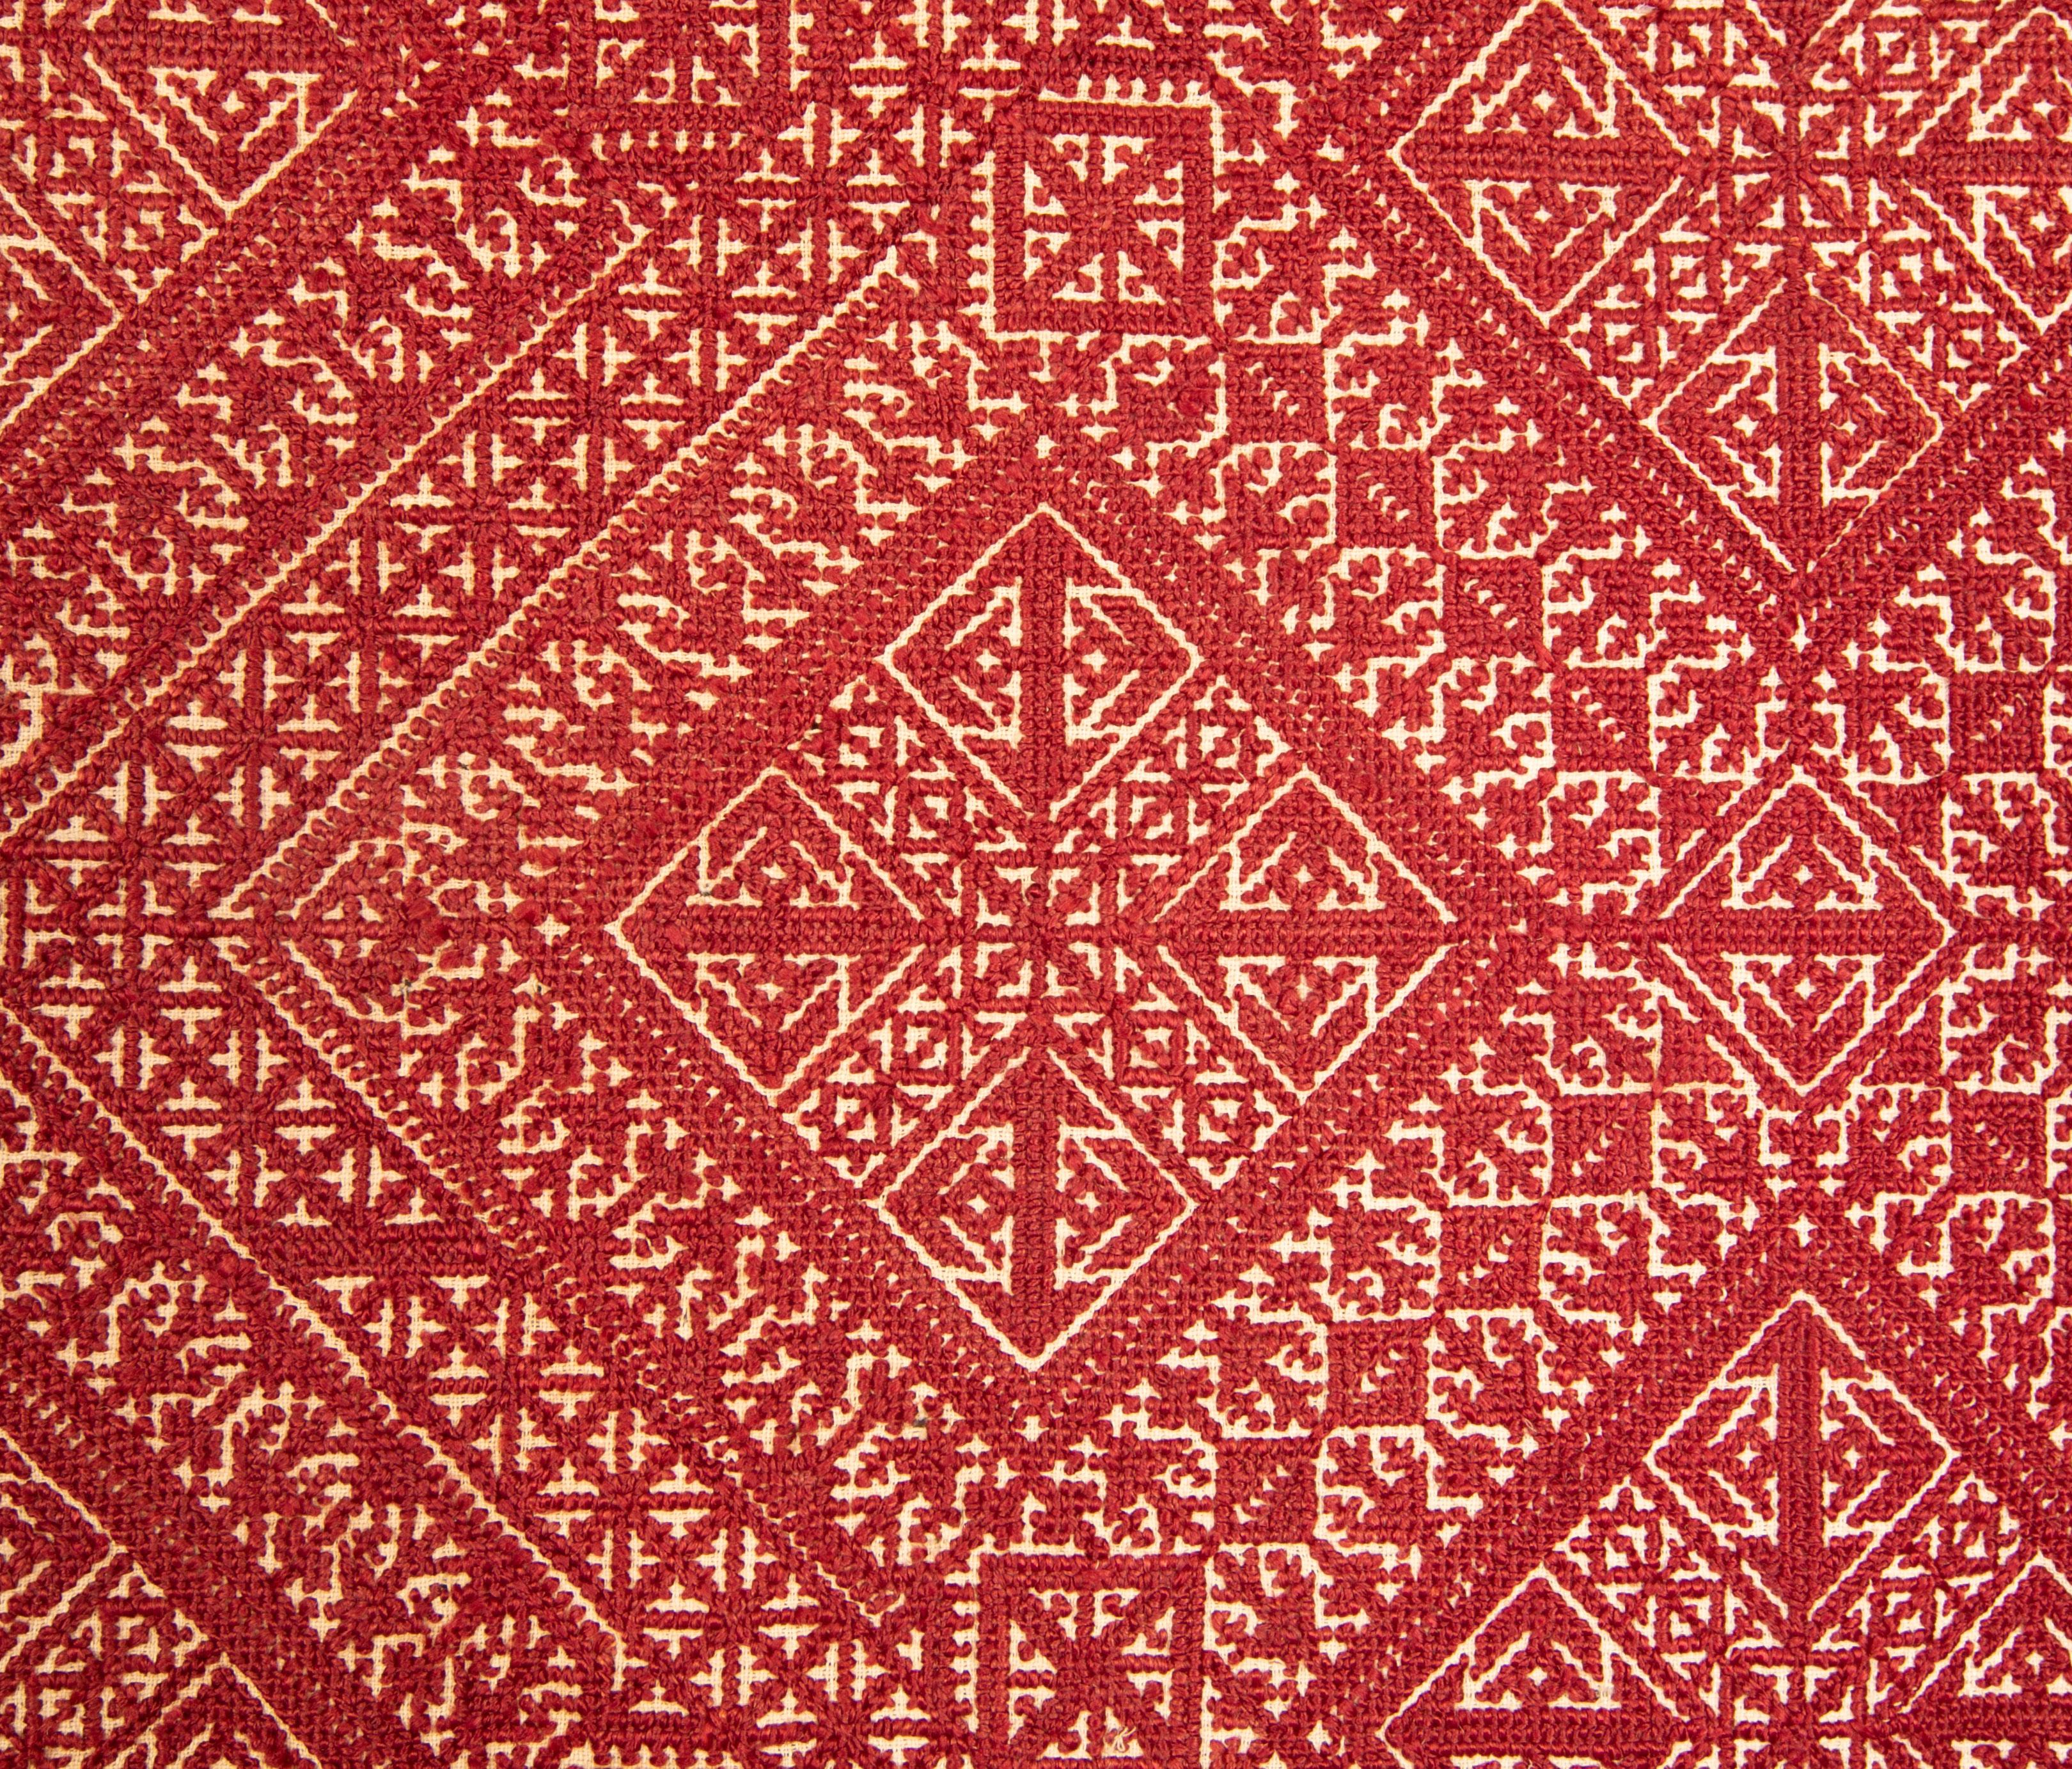 20th Century Antique Fez Embroidery from Morocco, 1900s